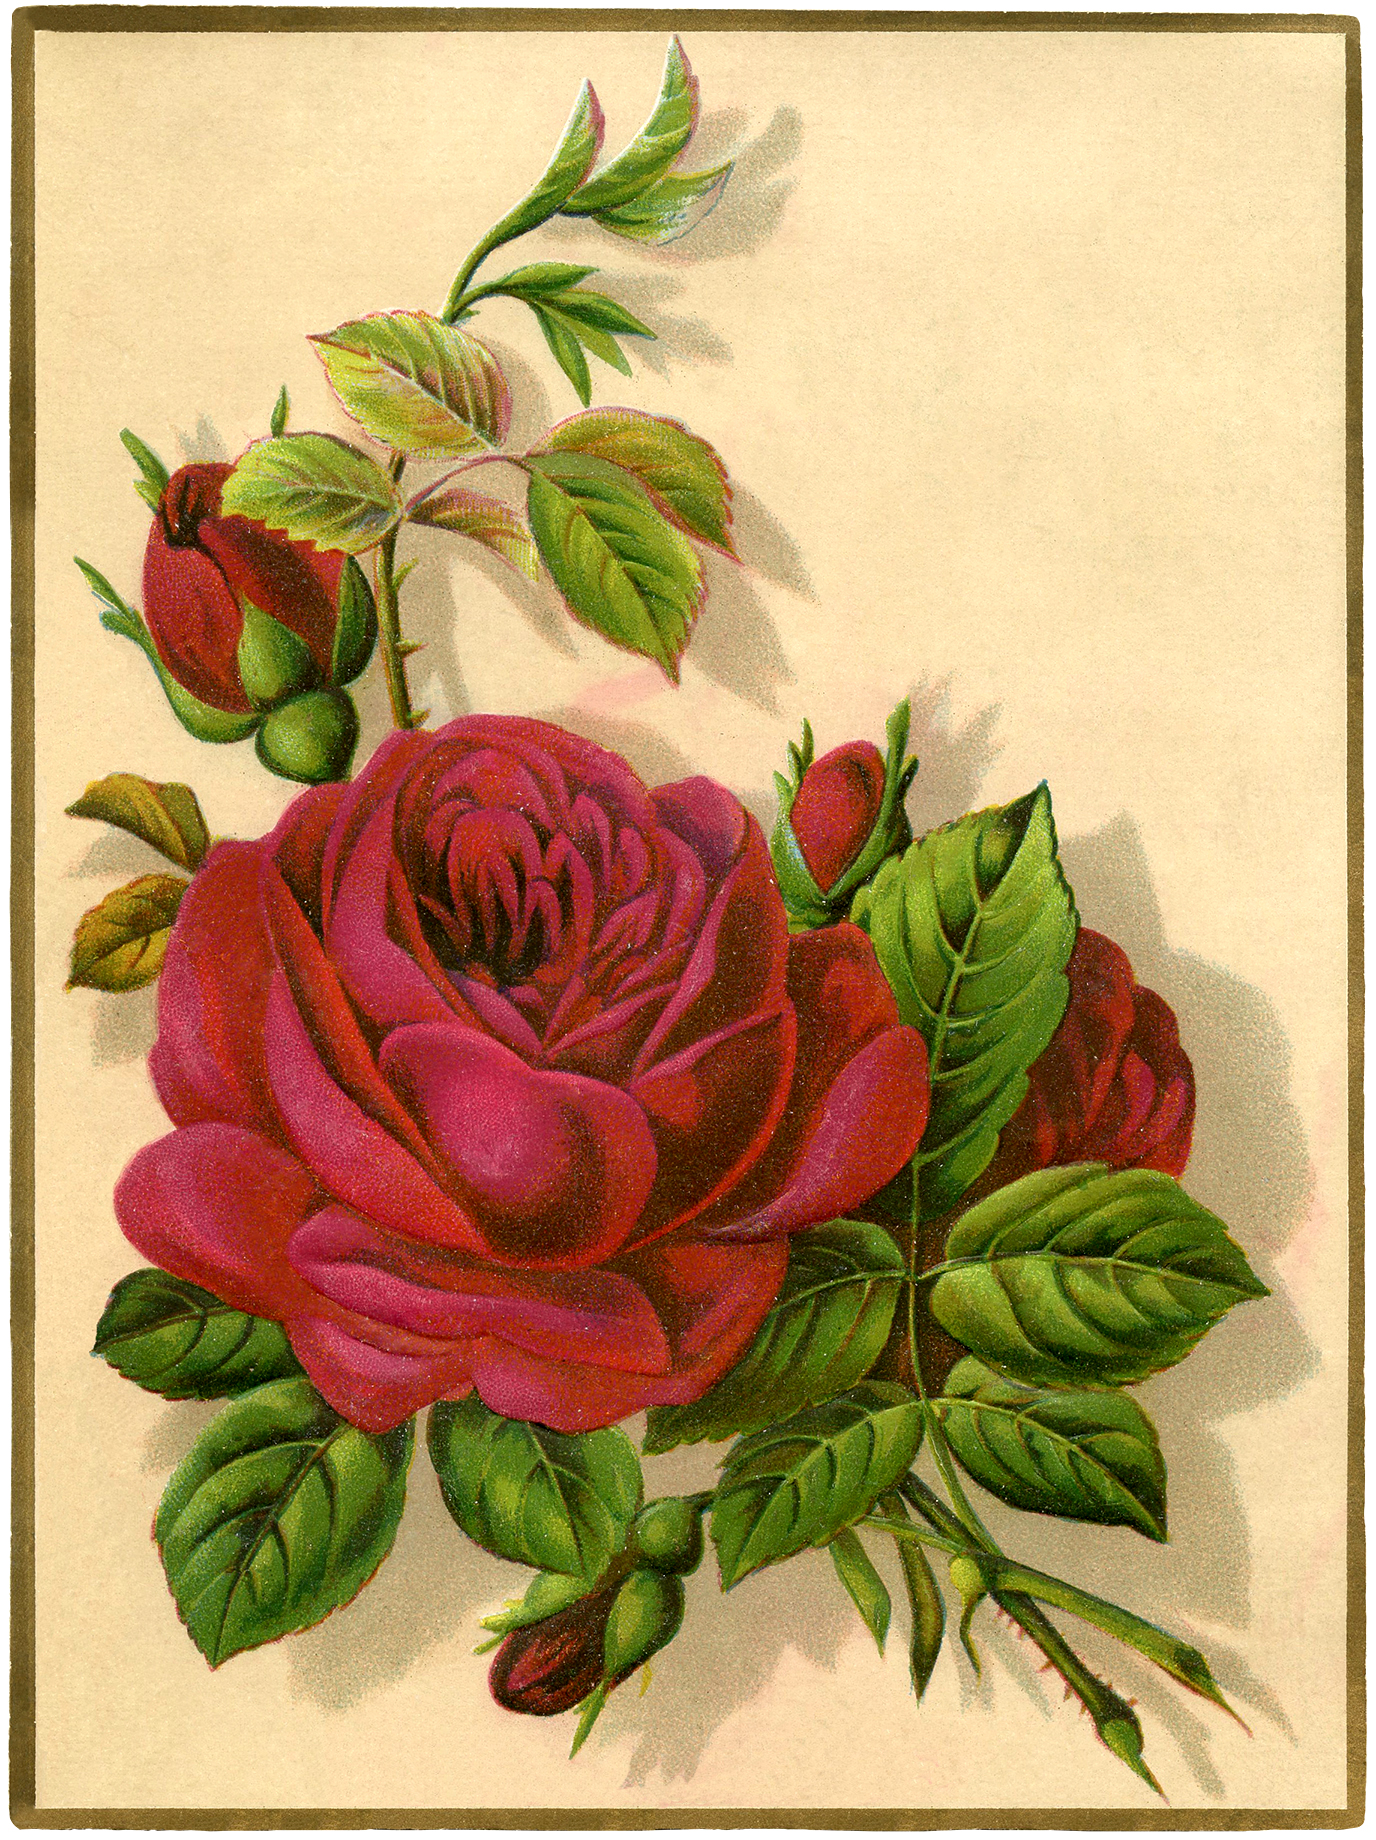 12 Red Rose Images - Pictures and Printables! - The Graphics Fairy